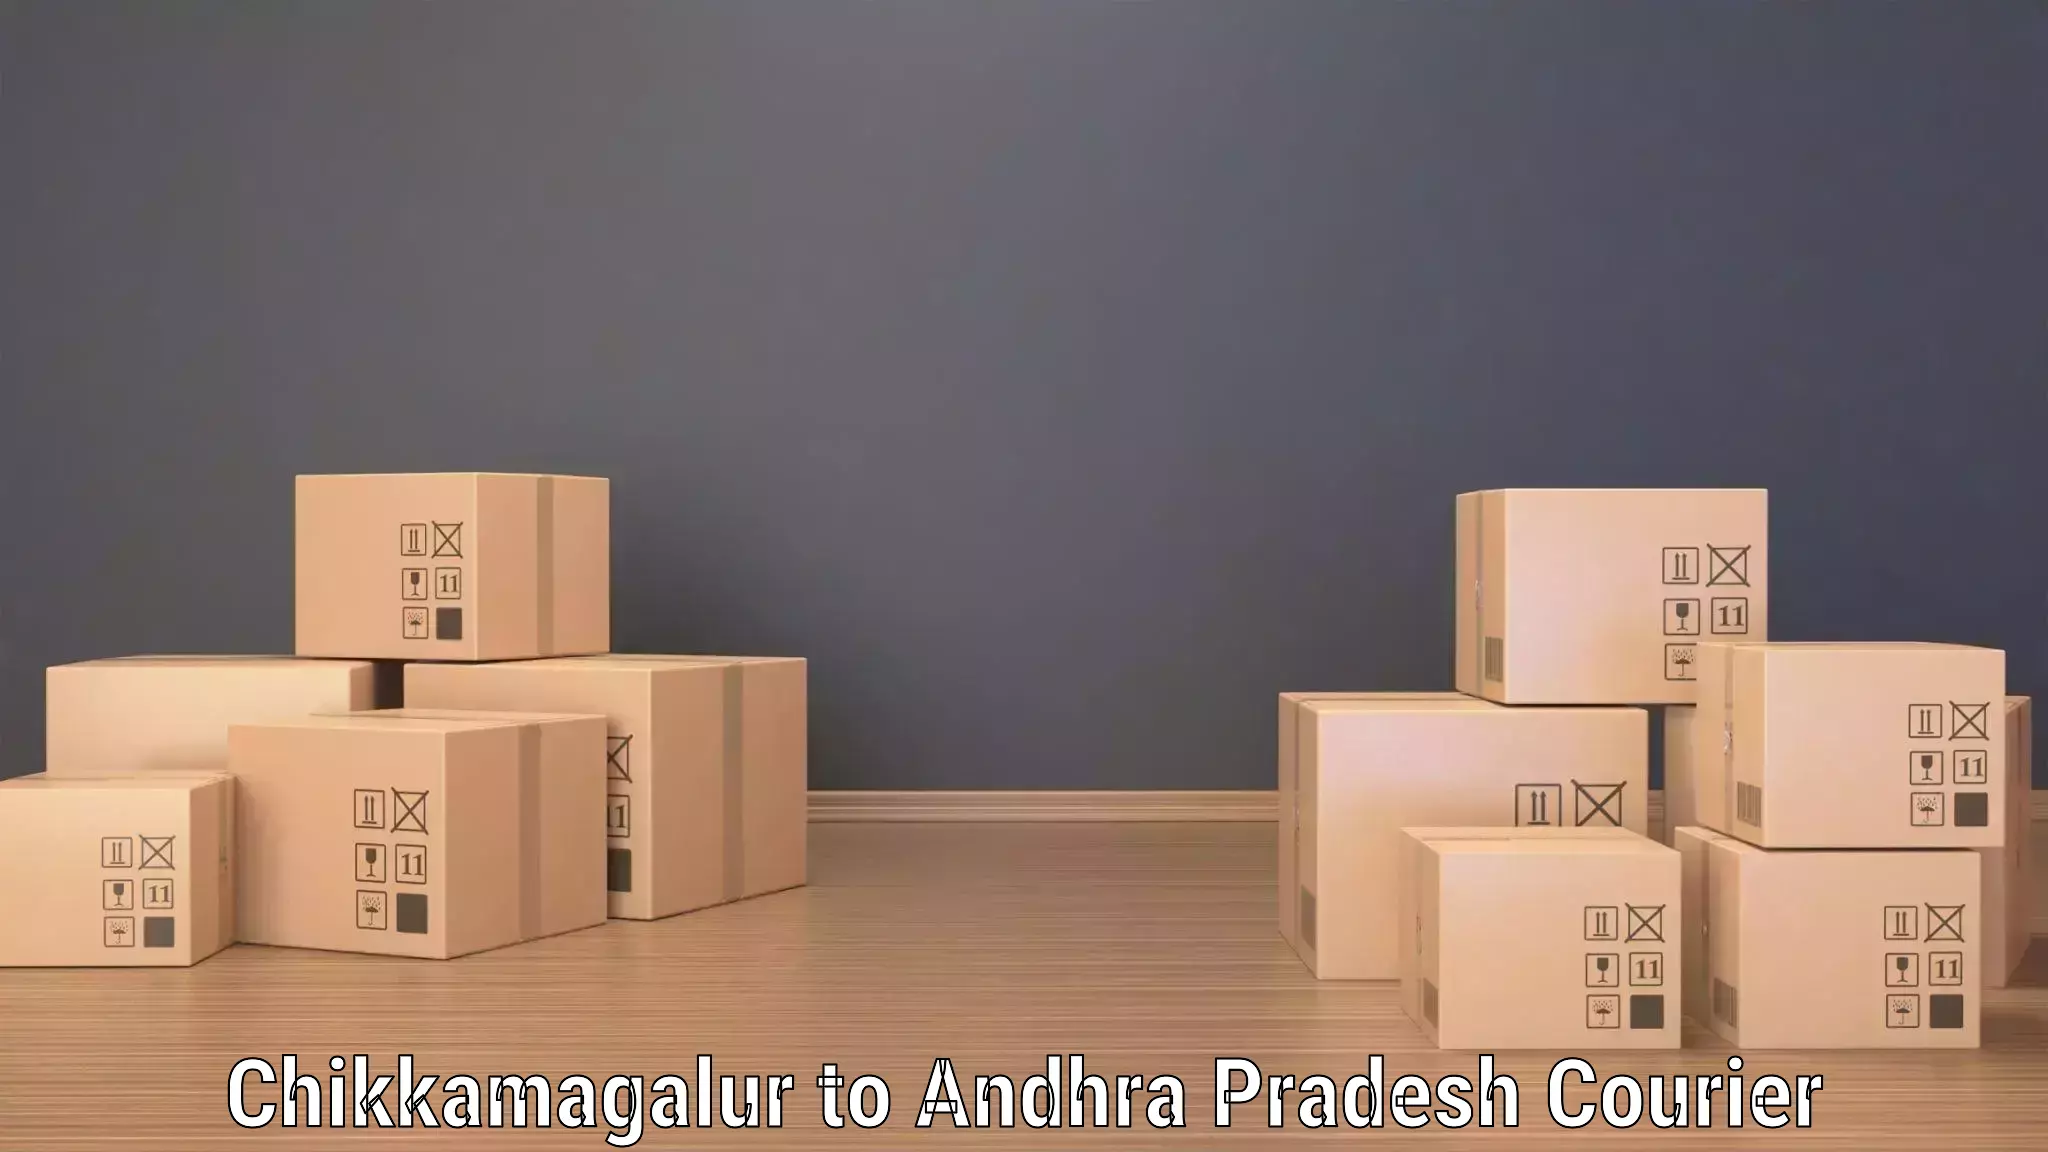 Reliable shipping solutions Chikkamagalur to Buckinghampet